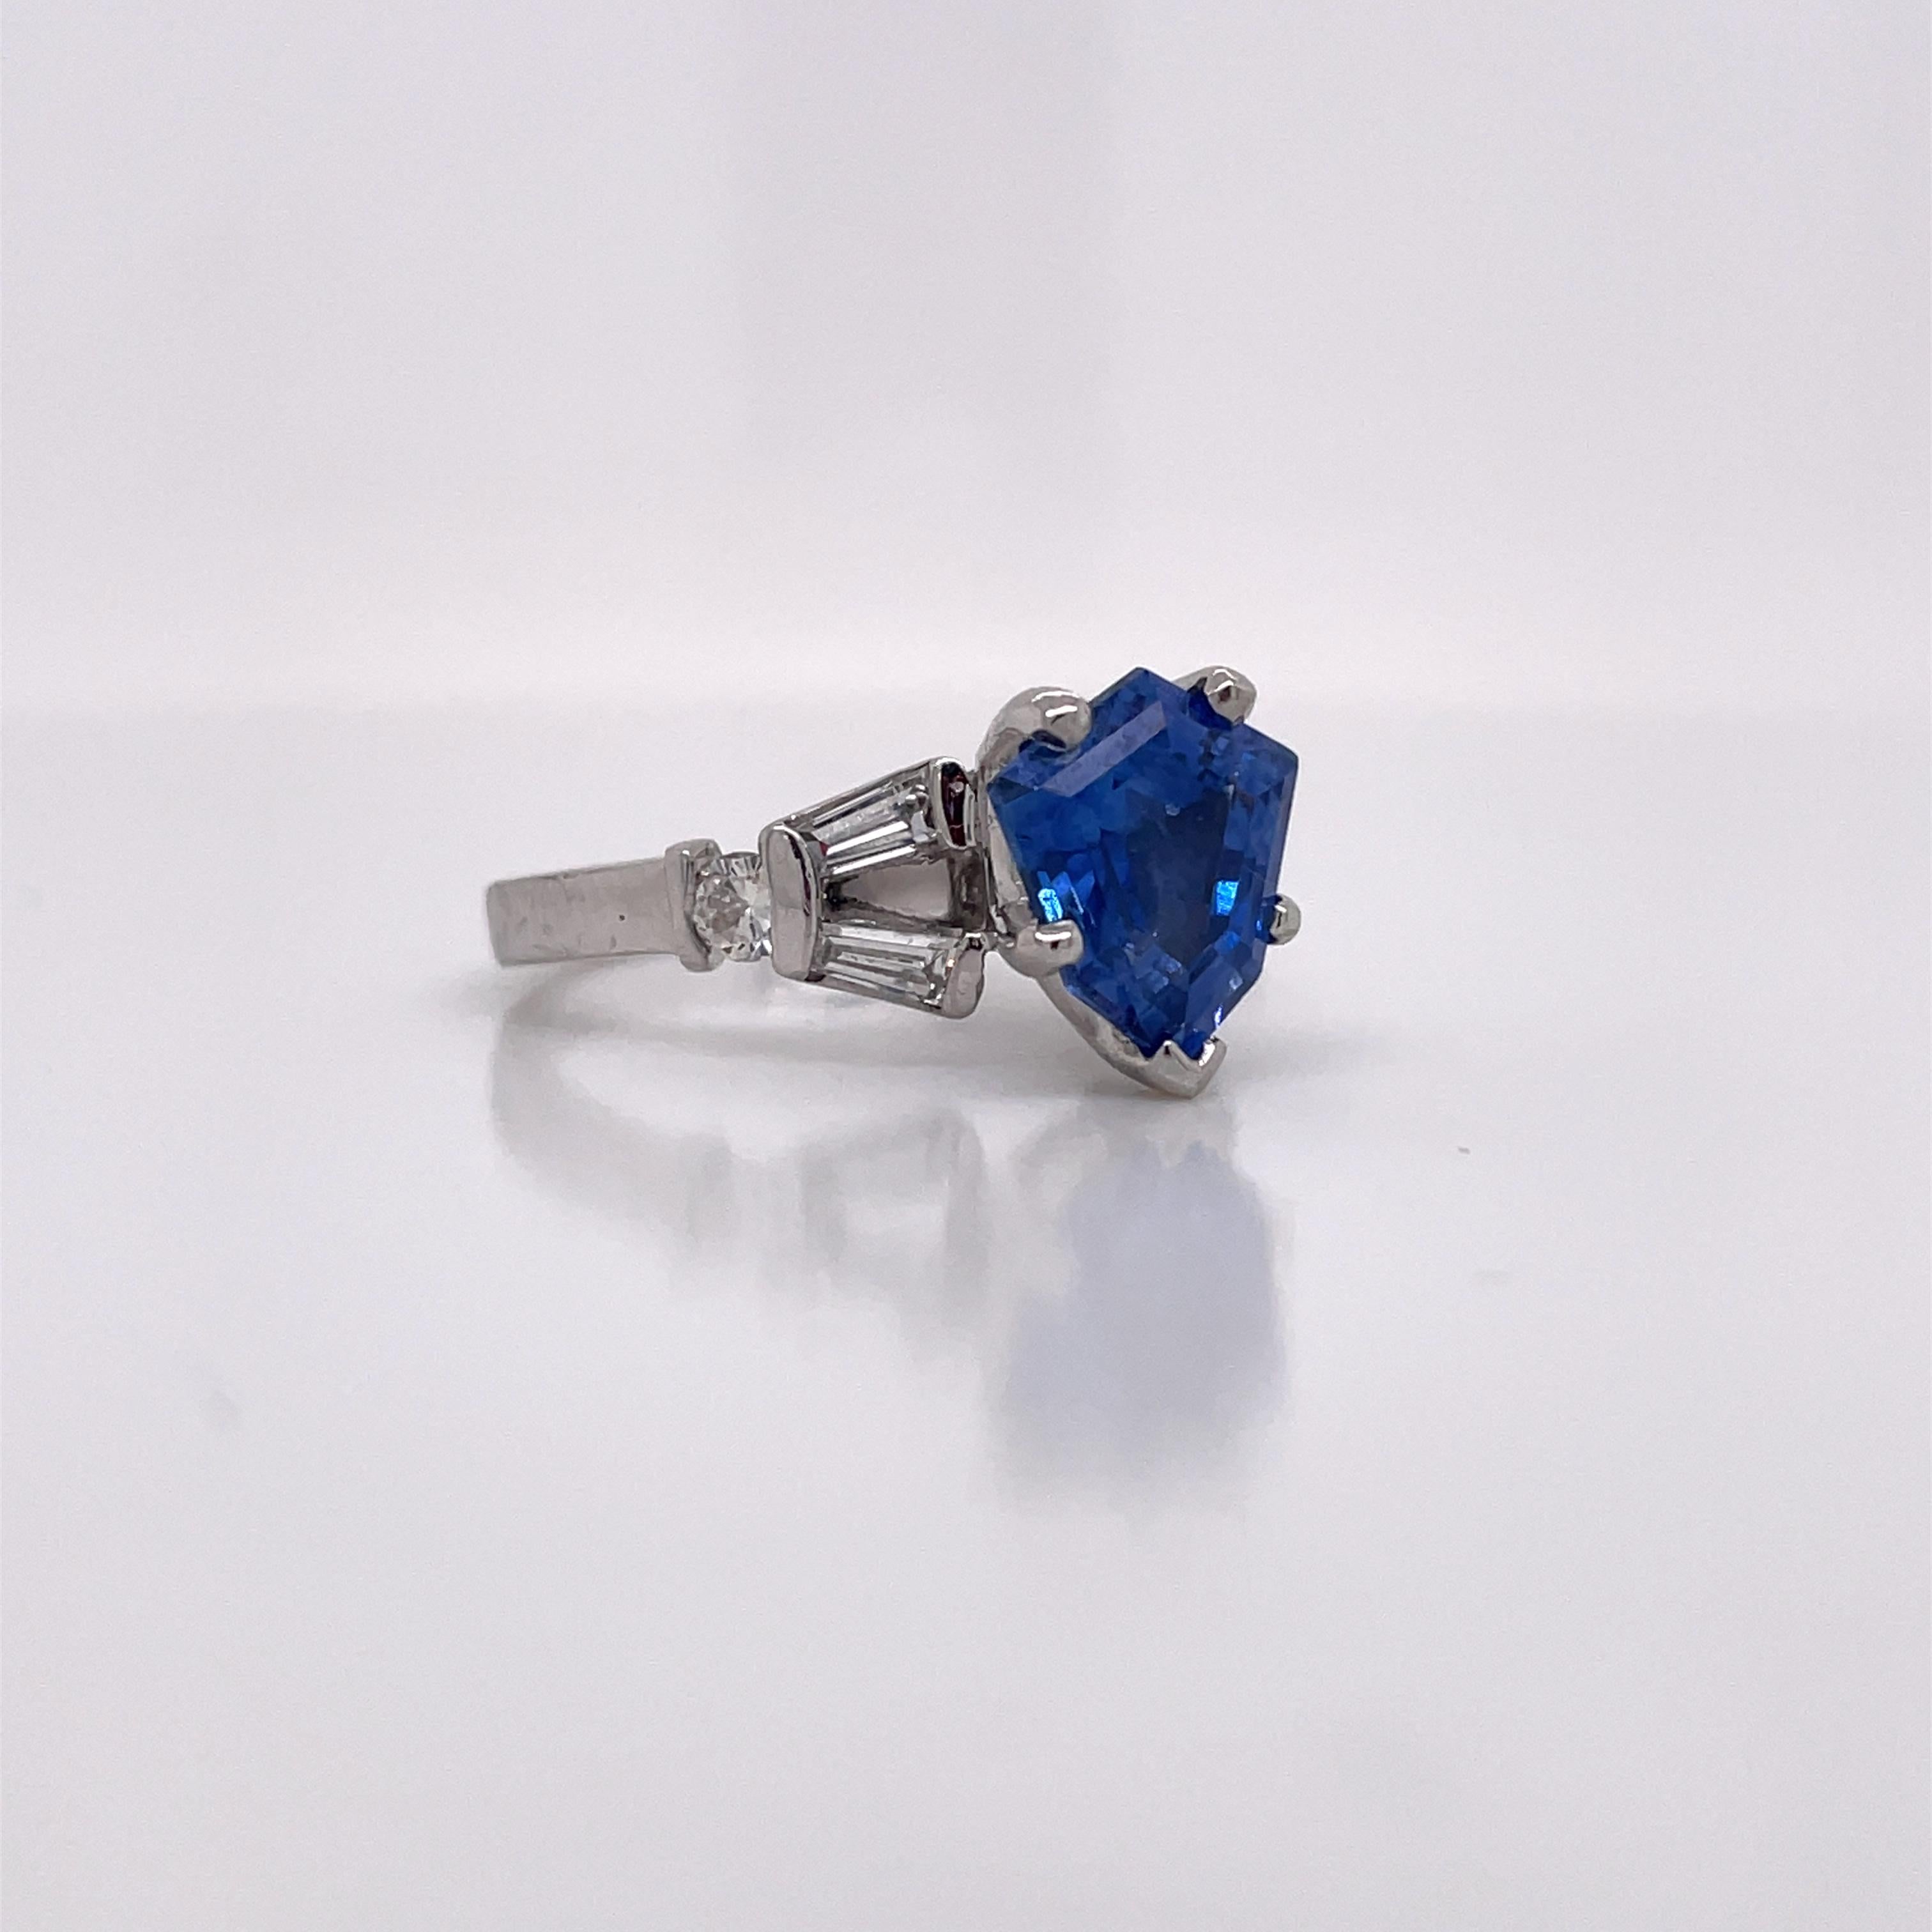 This is an absolutely breathtaking AGL Certified Sapphire Ring adorned with gorgeous tapered baguettes set in platinum! You won't find a ring quite like this! The center stone is an absolutely breathtaking 2.42ct shield-cut blue sapphire! Adorning